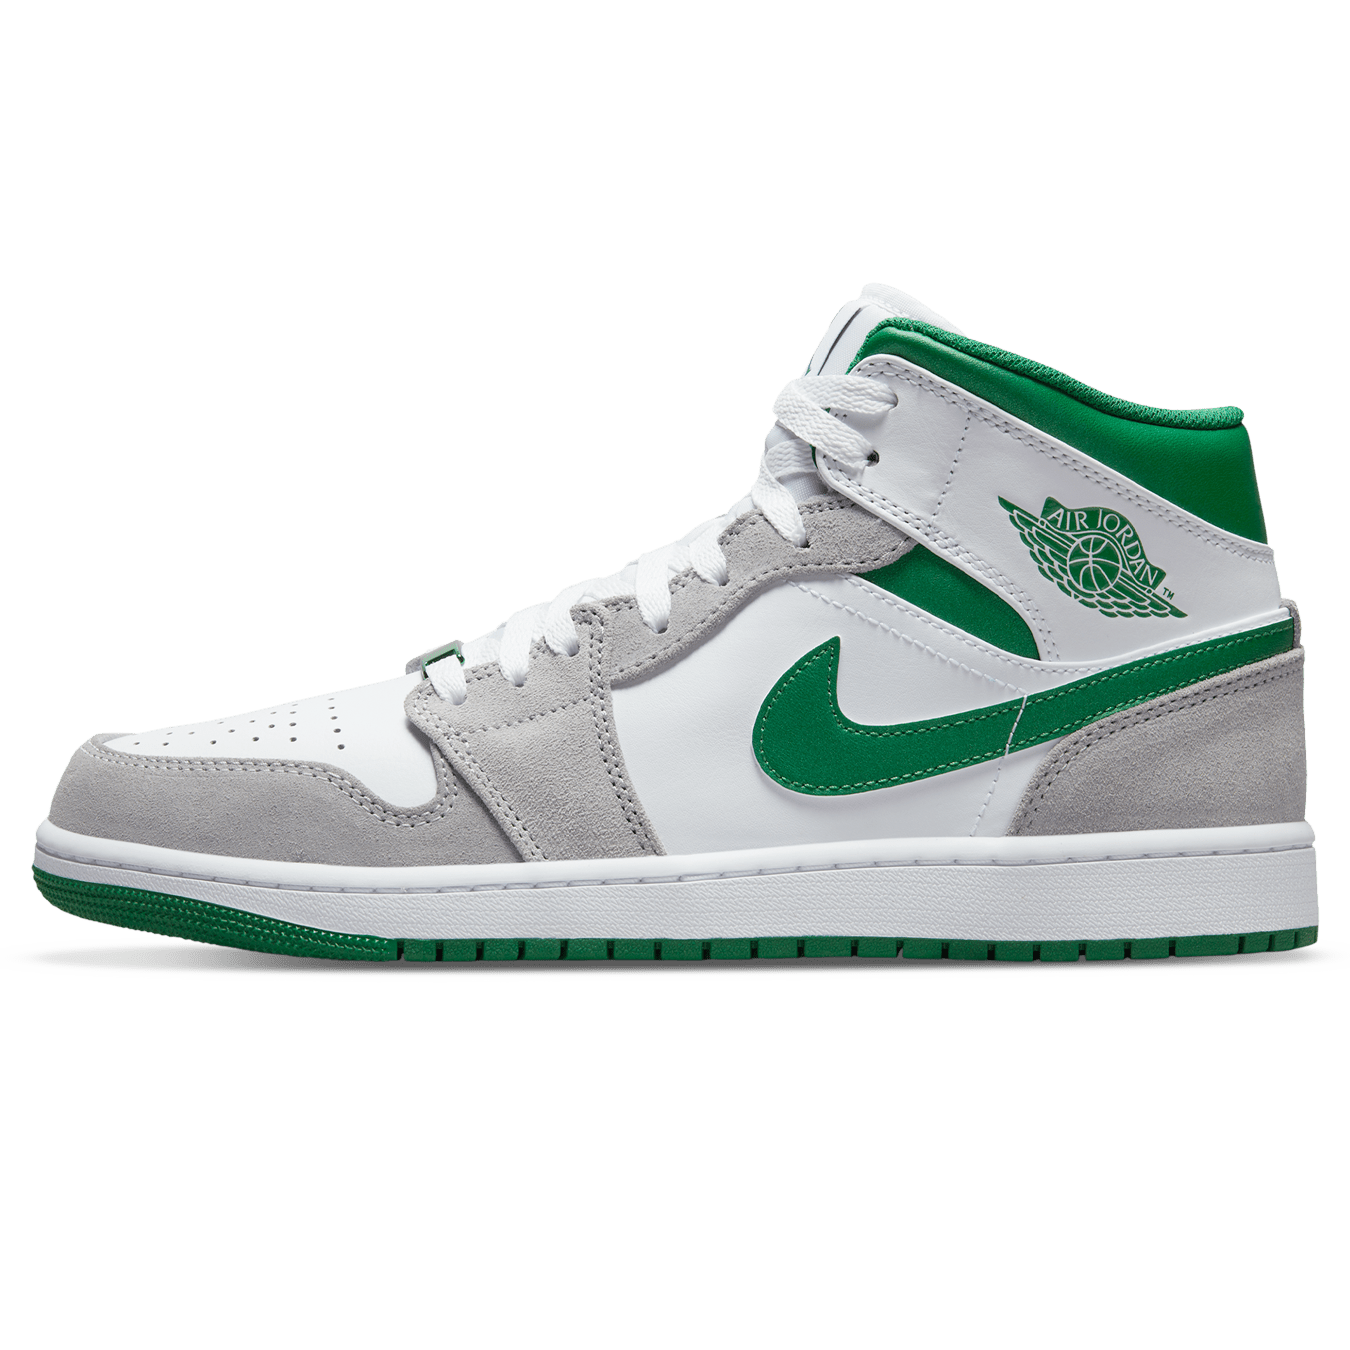 Double Boxed  199.99 Nike Air Jordan 1 Mid Grey Pine Green Double Boxed